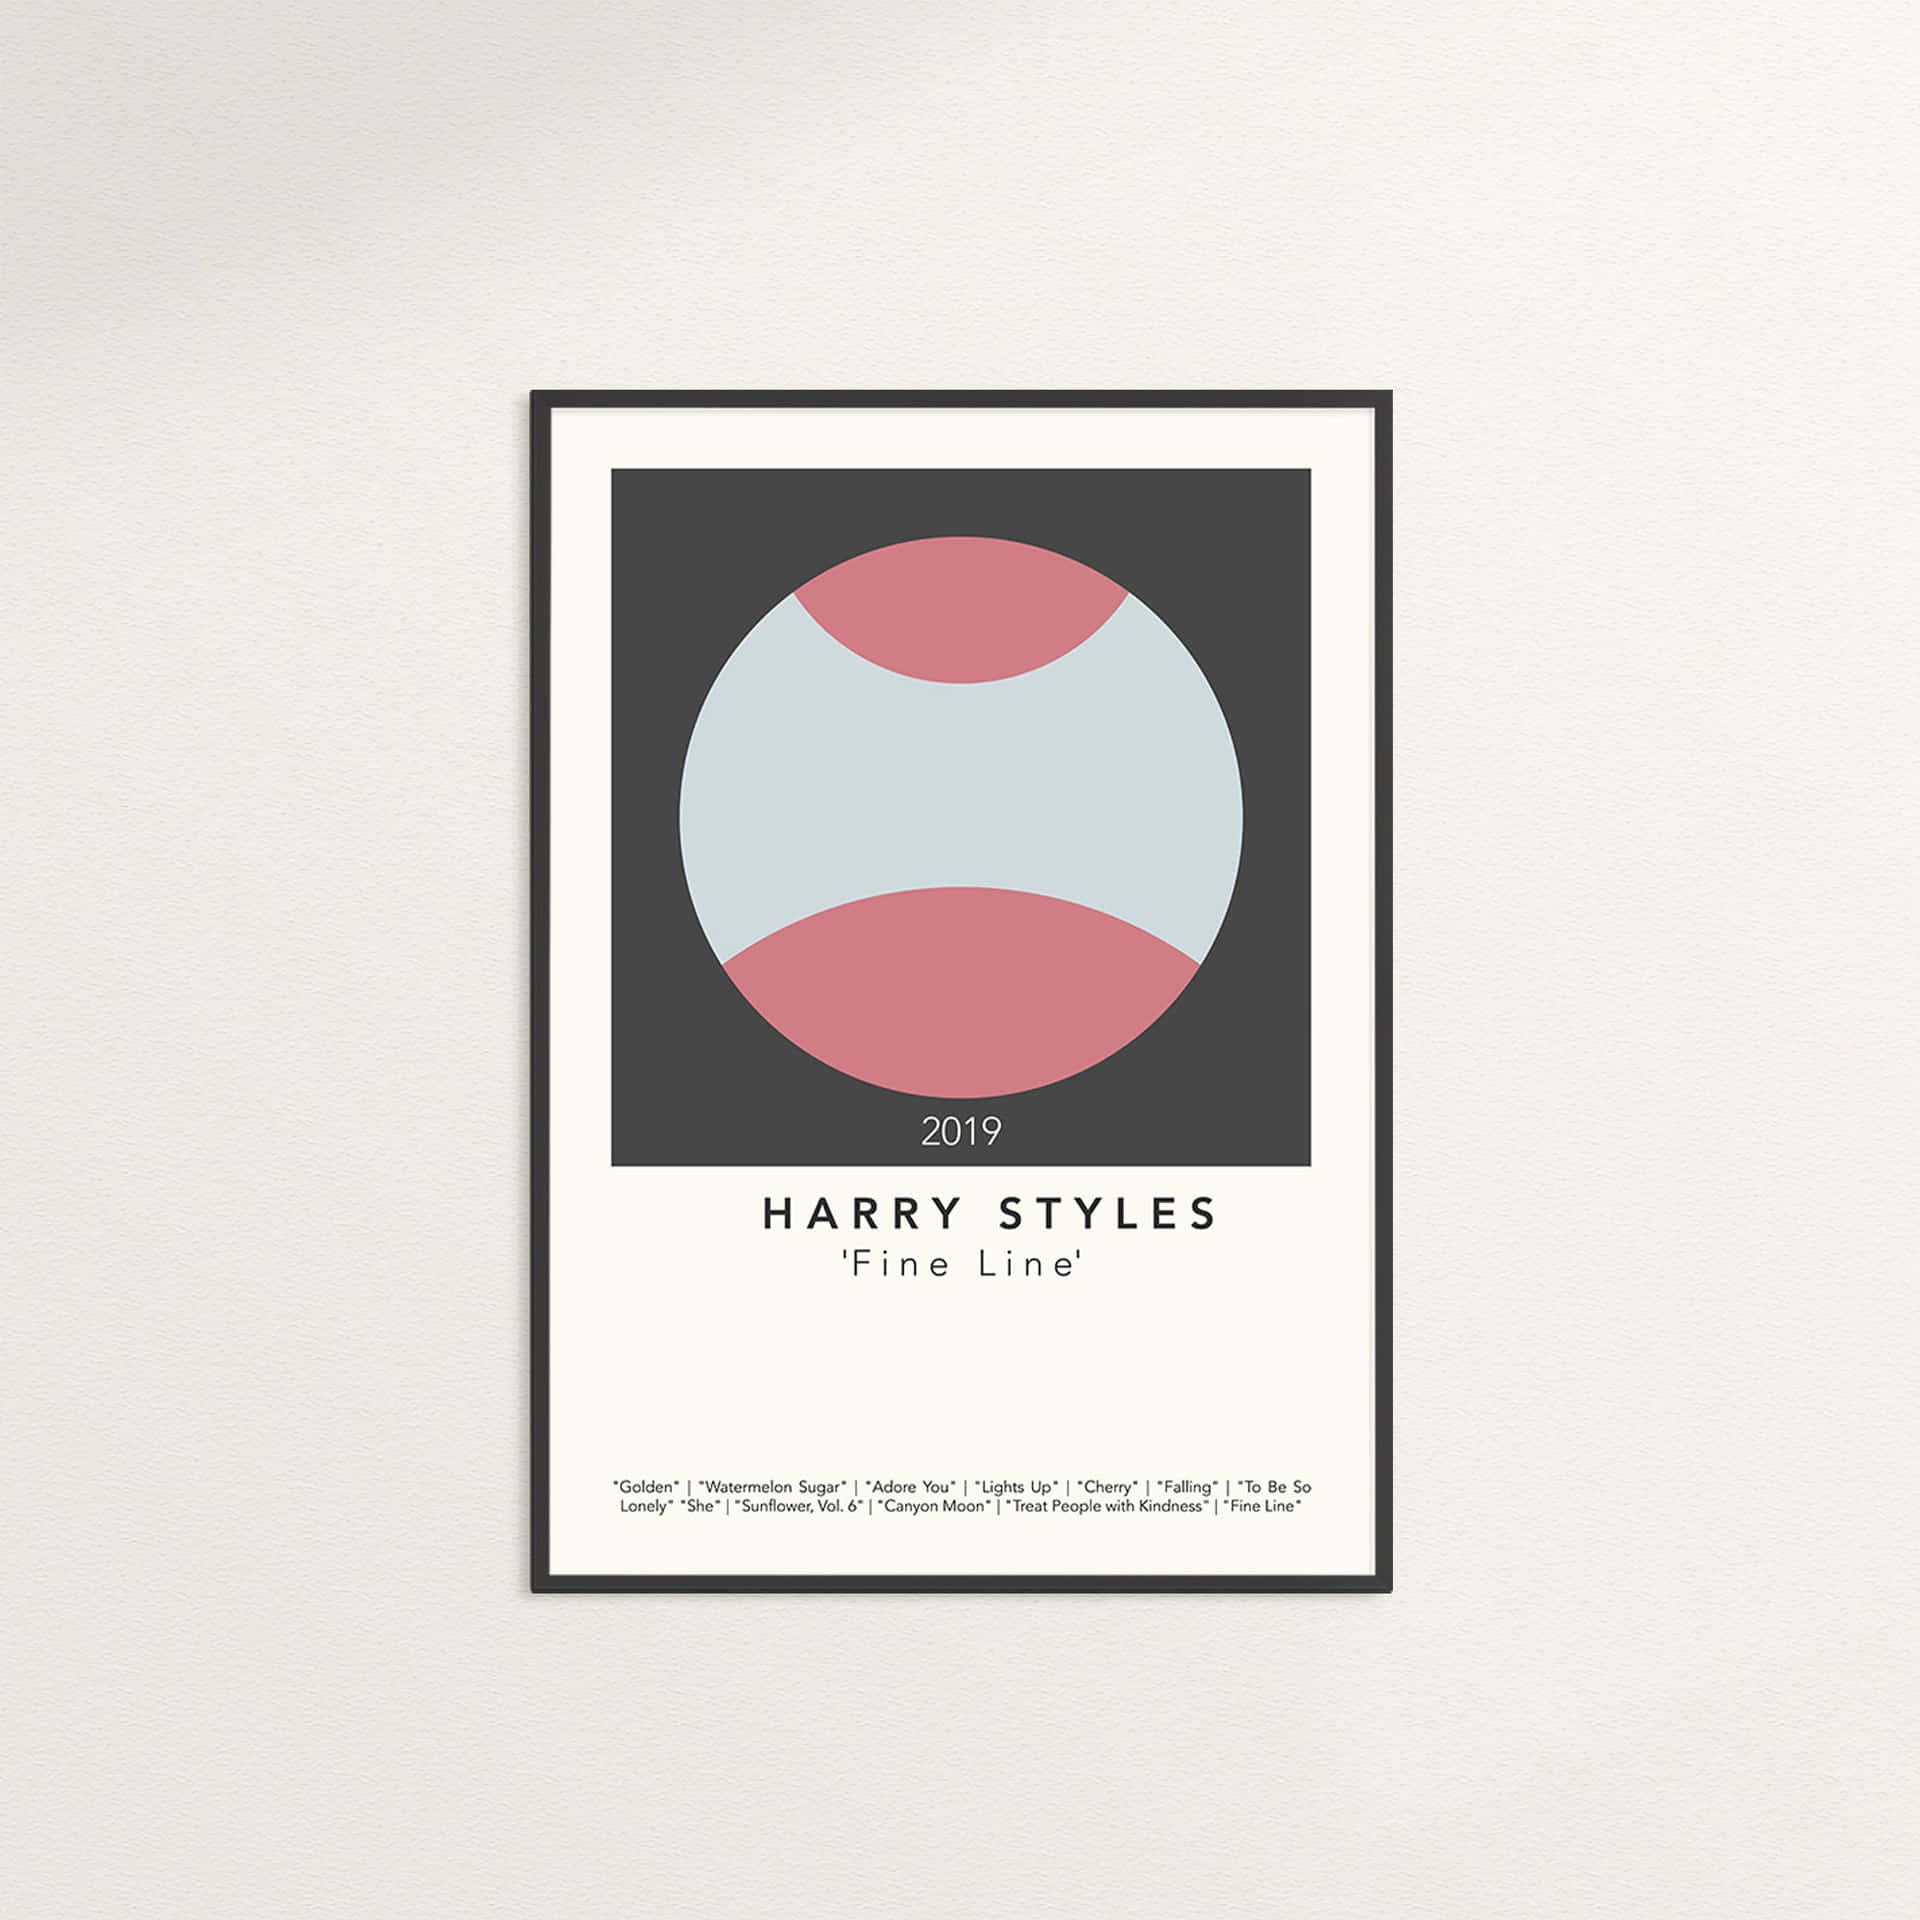 Simple Abstract Design Of Harry Styles Album Cover Wallpaper